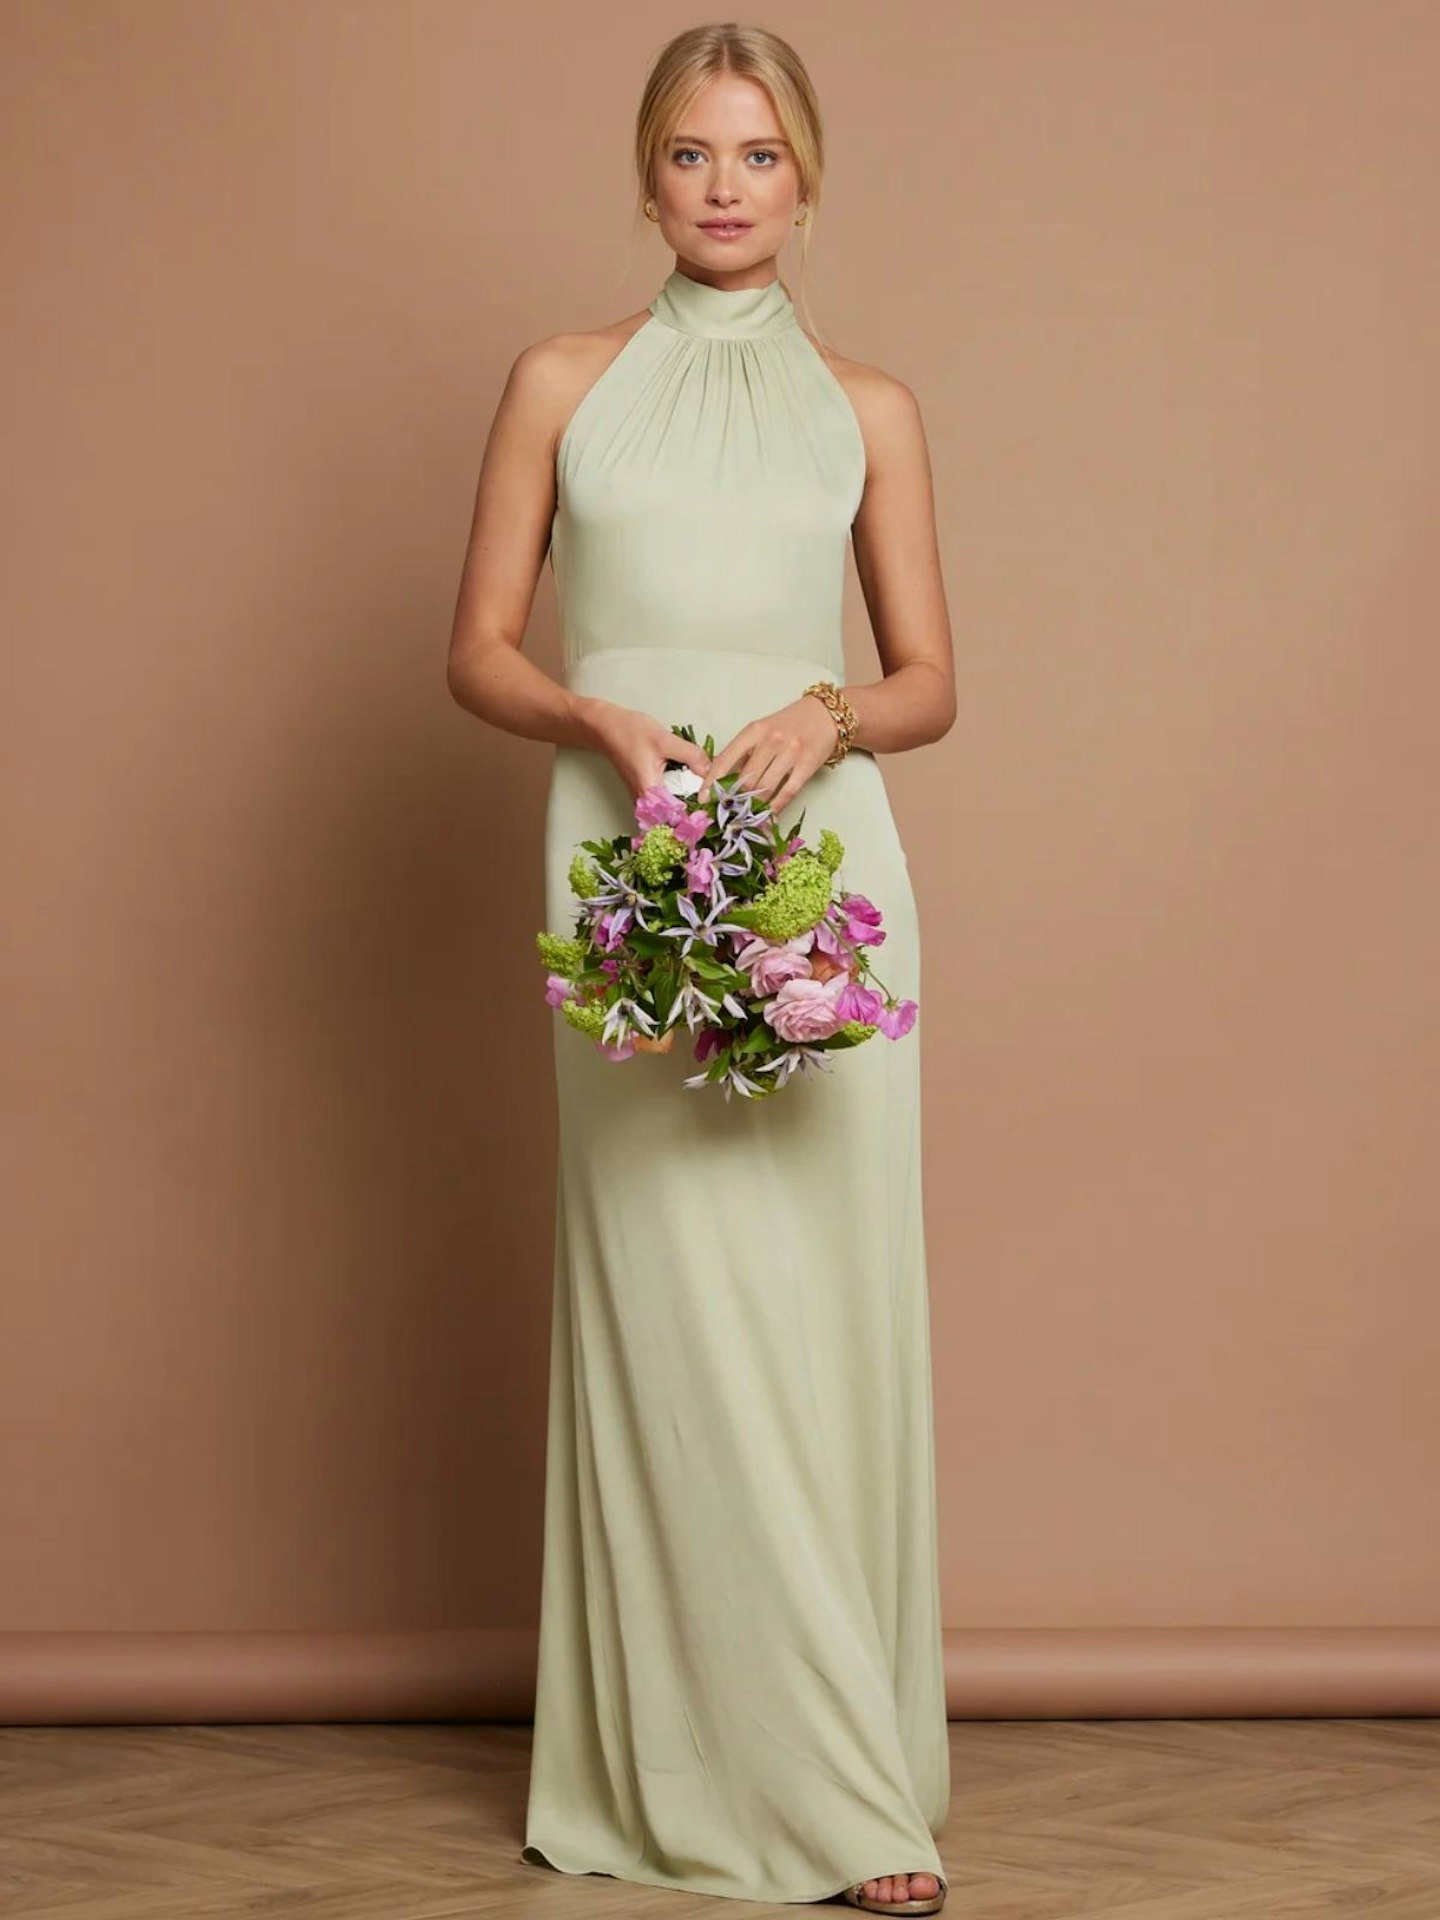 The Best Sage Green Bridesmaid Dresses That Suit Everyone